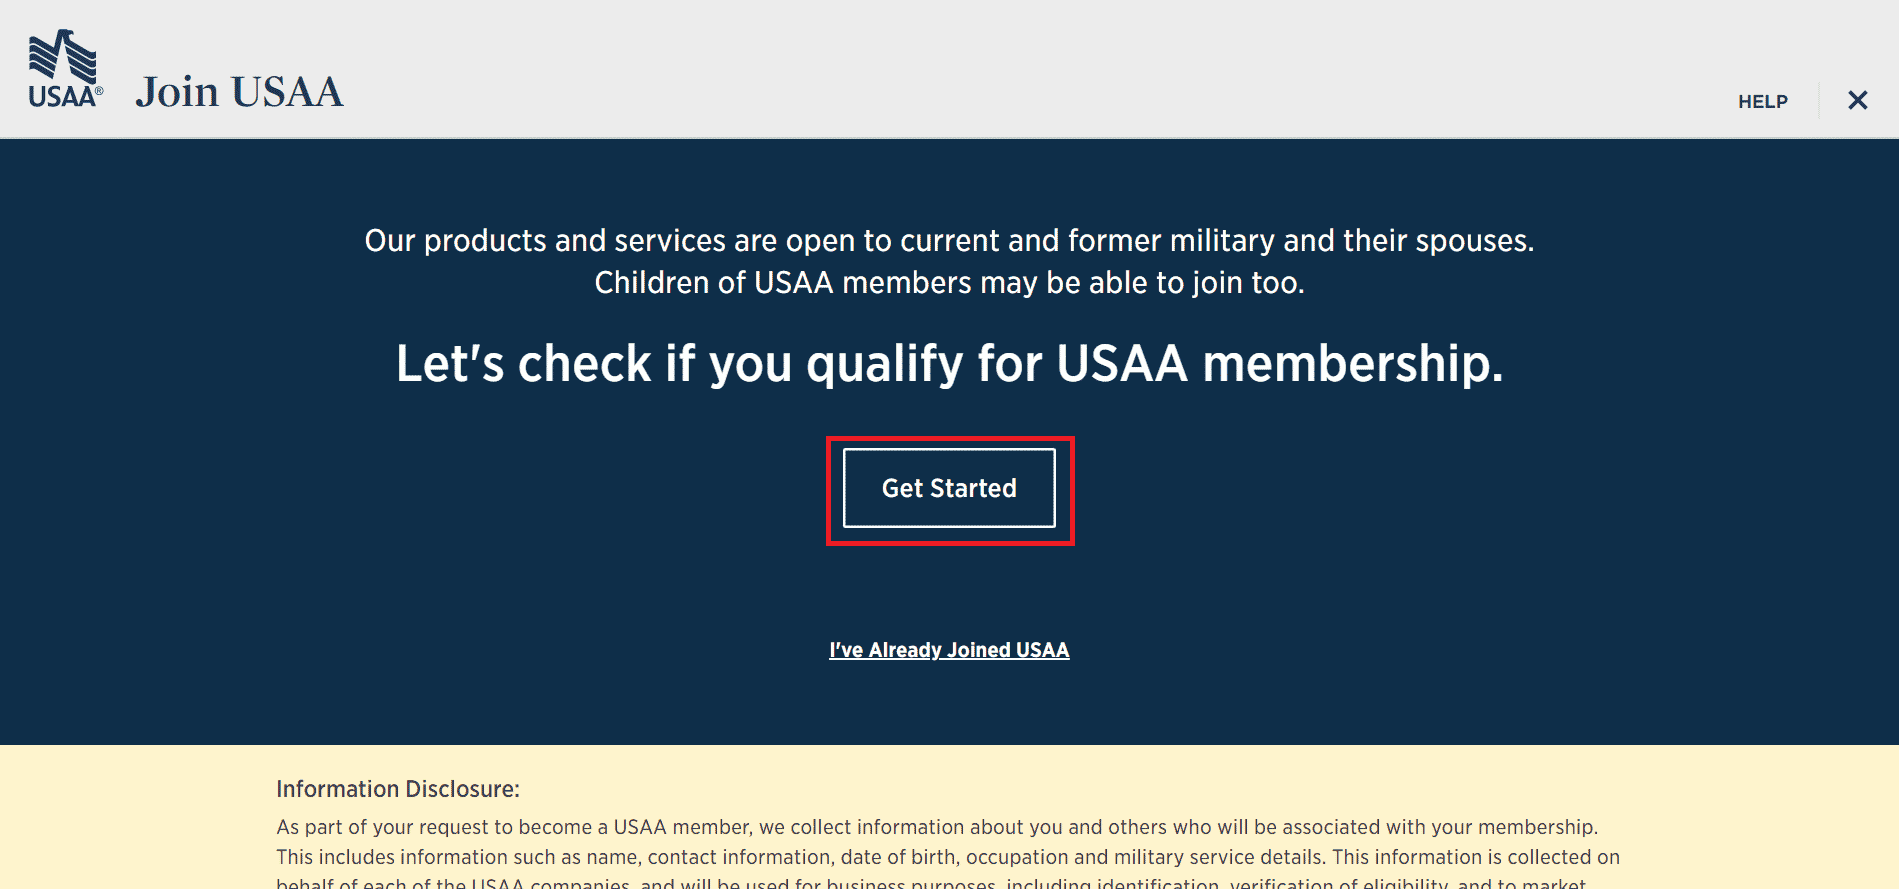 Click on Get Started to check if you qualify or not | deposit cash into USAA account